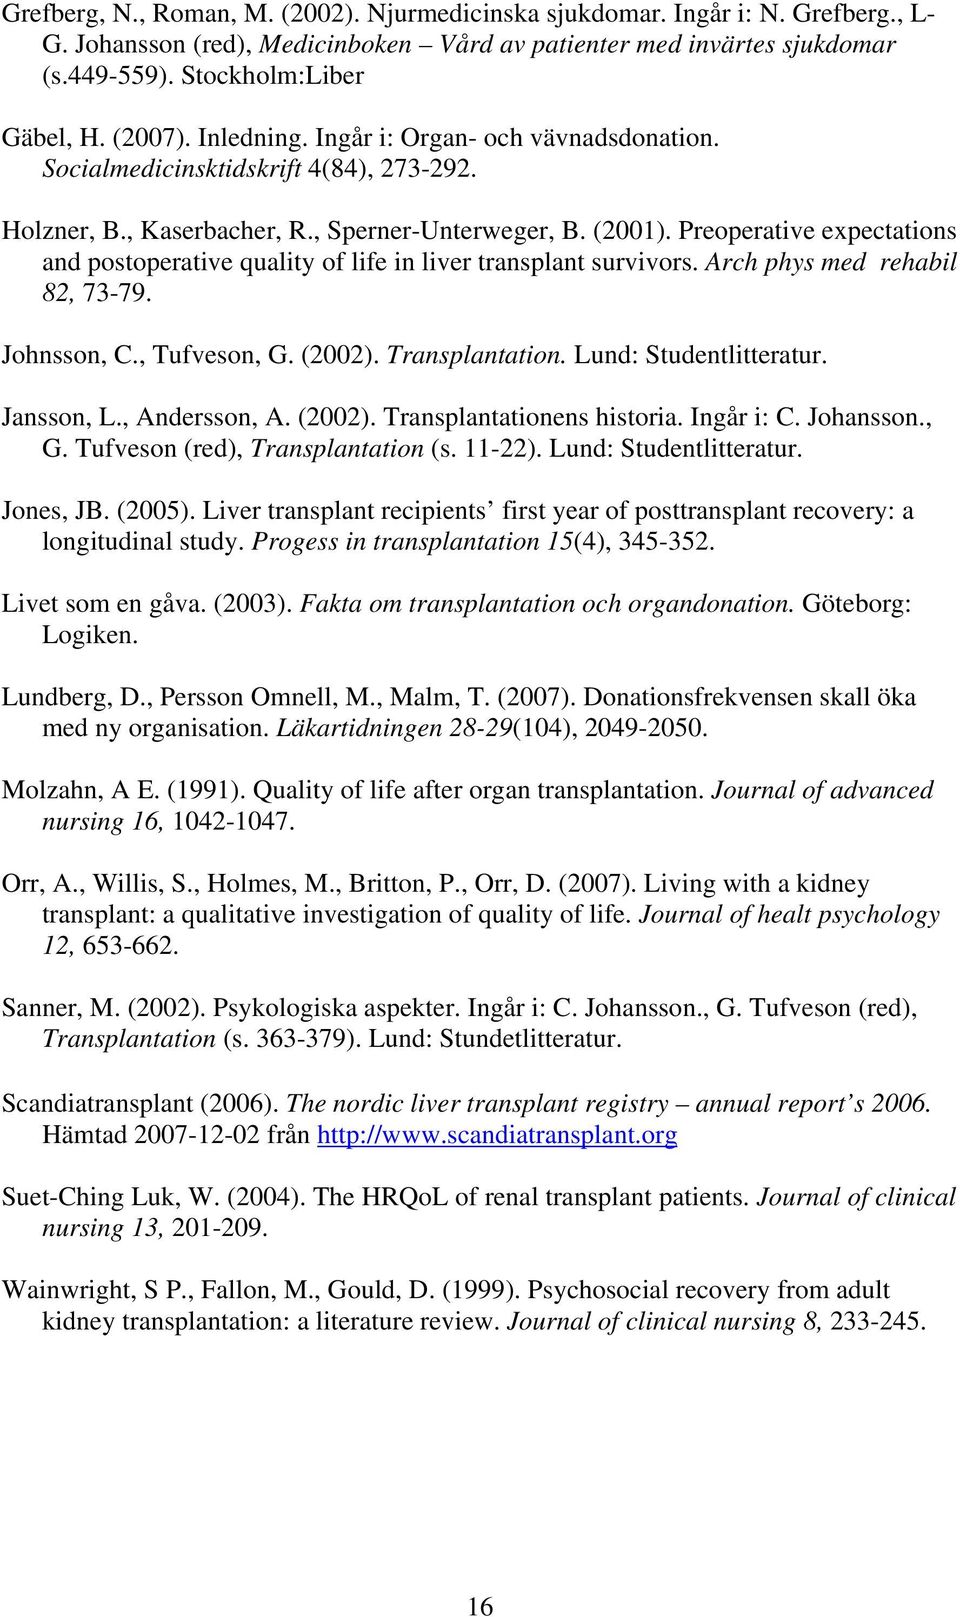 Preoperative expectations and postoperative quality of life in liver transplant survivors. Arch phys med rehabil 82, 73-79. Johnsson, C., Tufveson, G. (2002). Transplantation. Lund: Studentlitteratur.